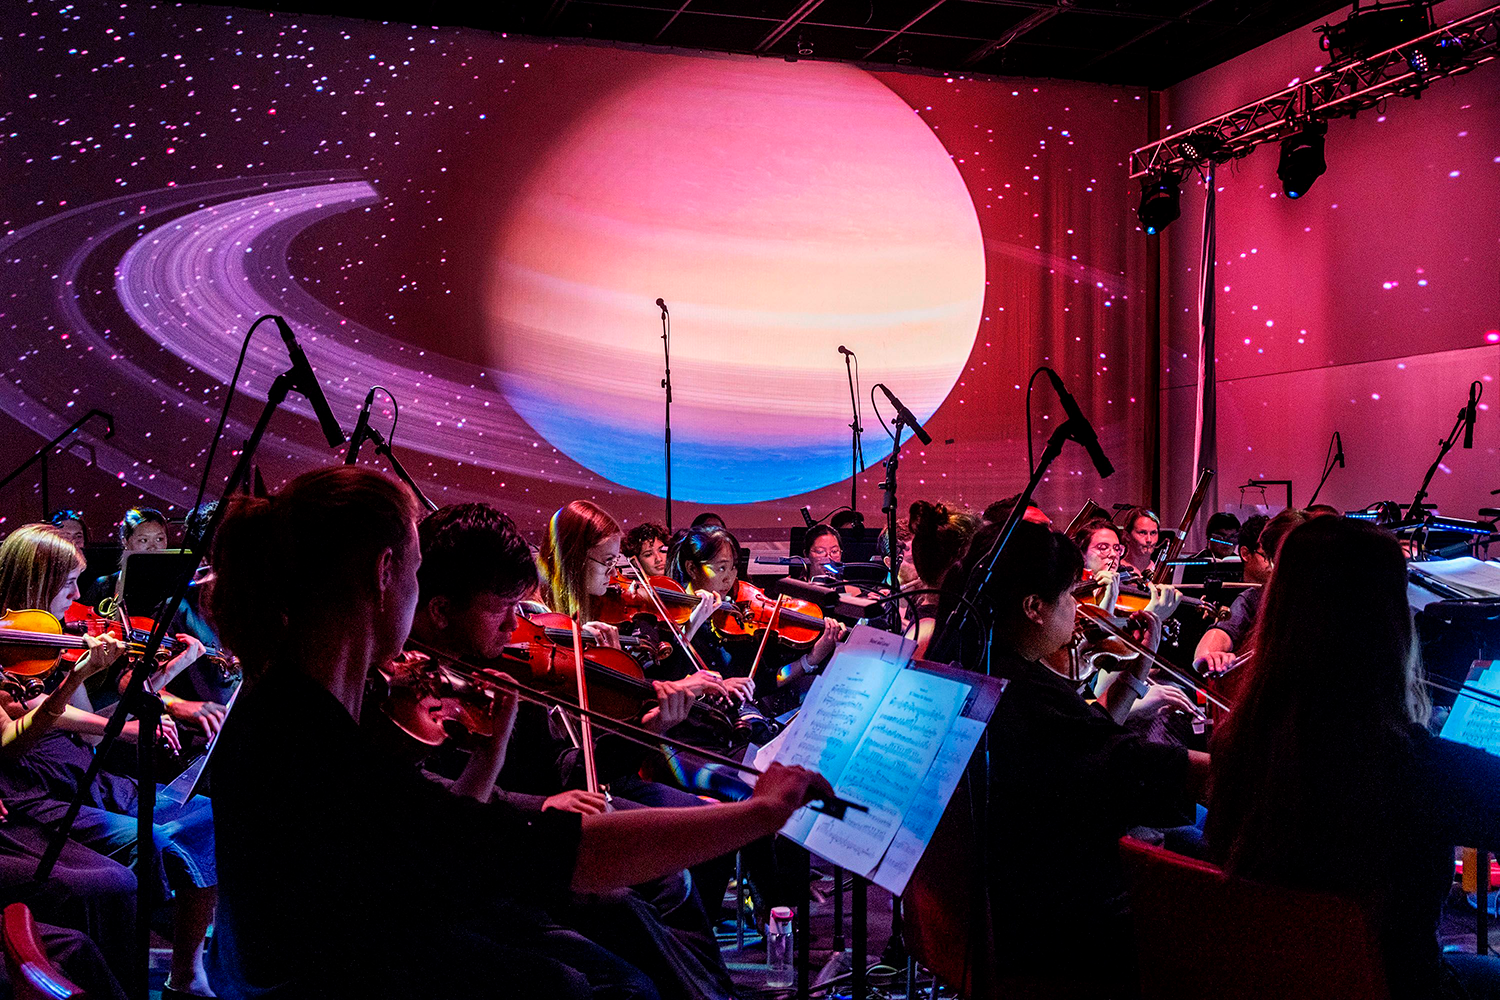 Miami Beach Classical Music Festival's Immersive Space Symphony Concert returns again after its premiere last year. (Photo courtesy of Miami Beach Classical Music Festival)